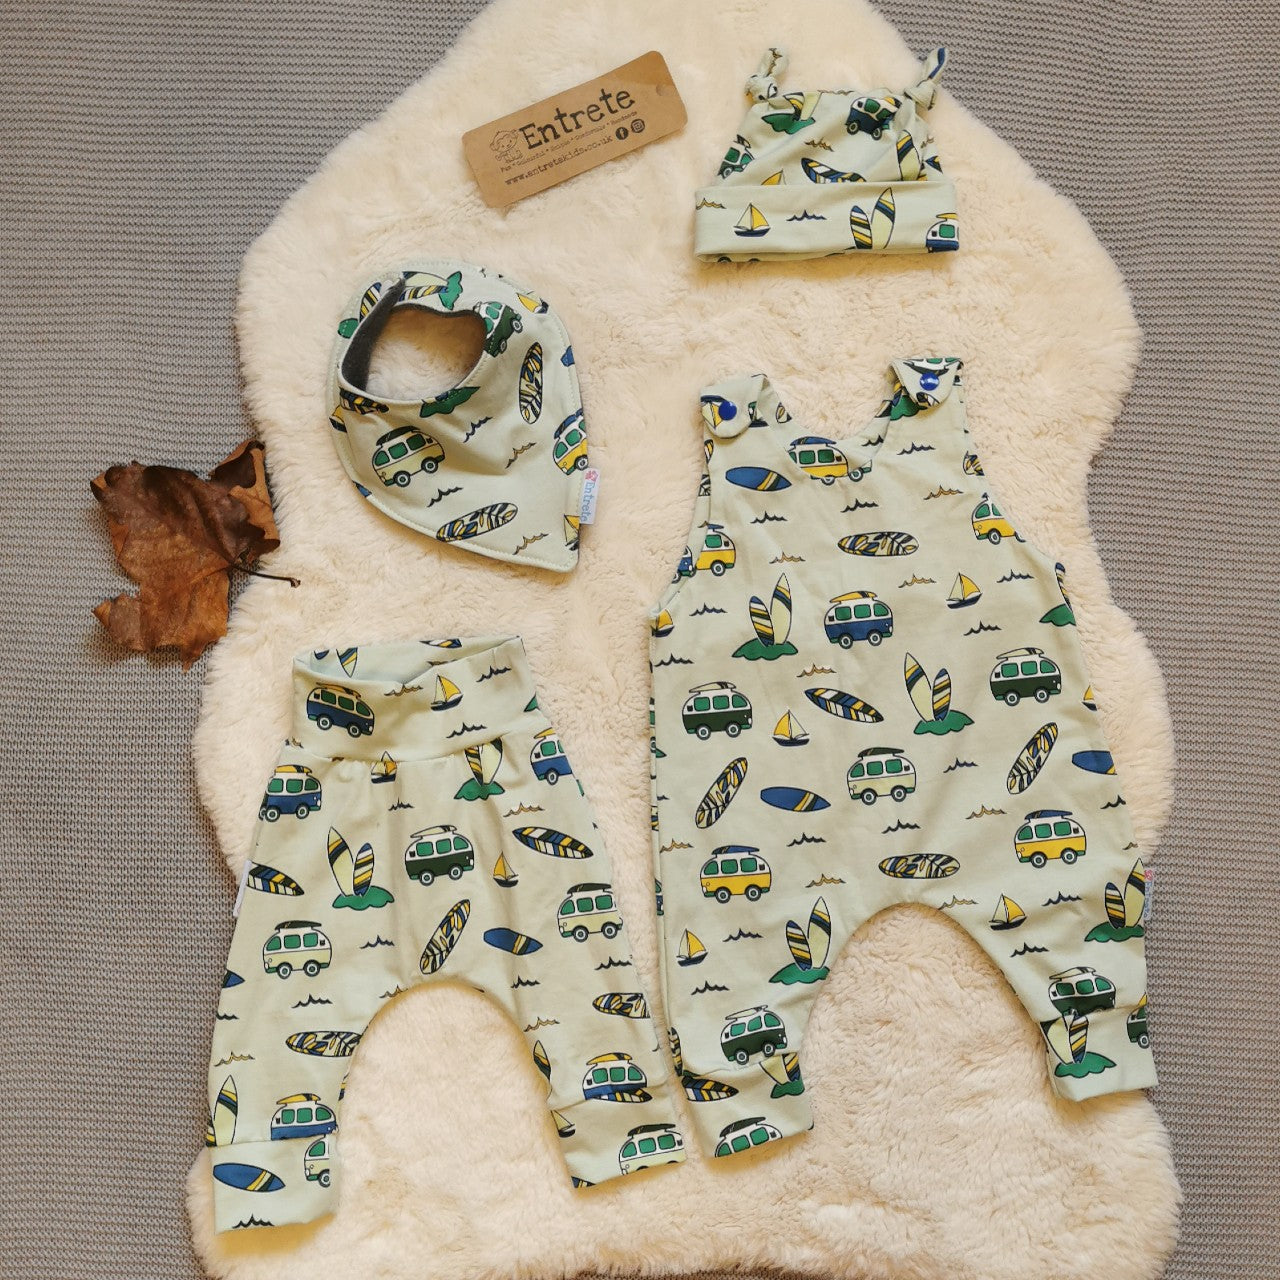 A large baby gift set shown in mint surf campervans for demonstration purposes, your gift set will be handmade in cream chicks cotton jersey.